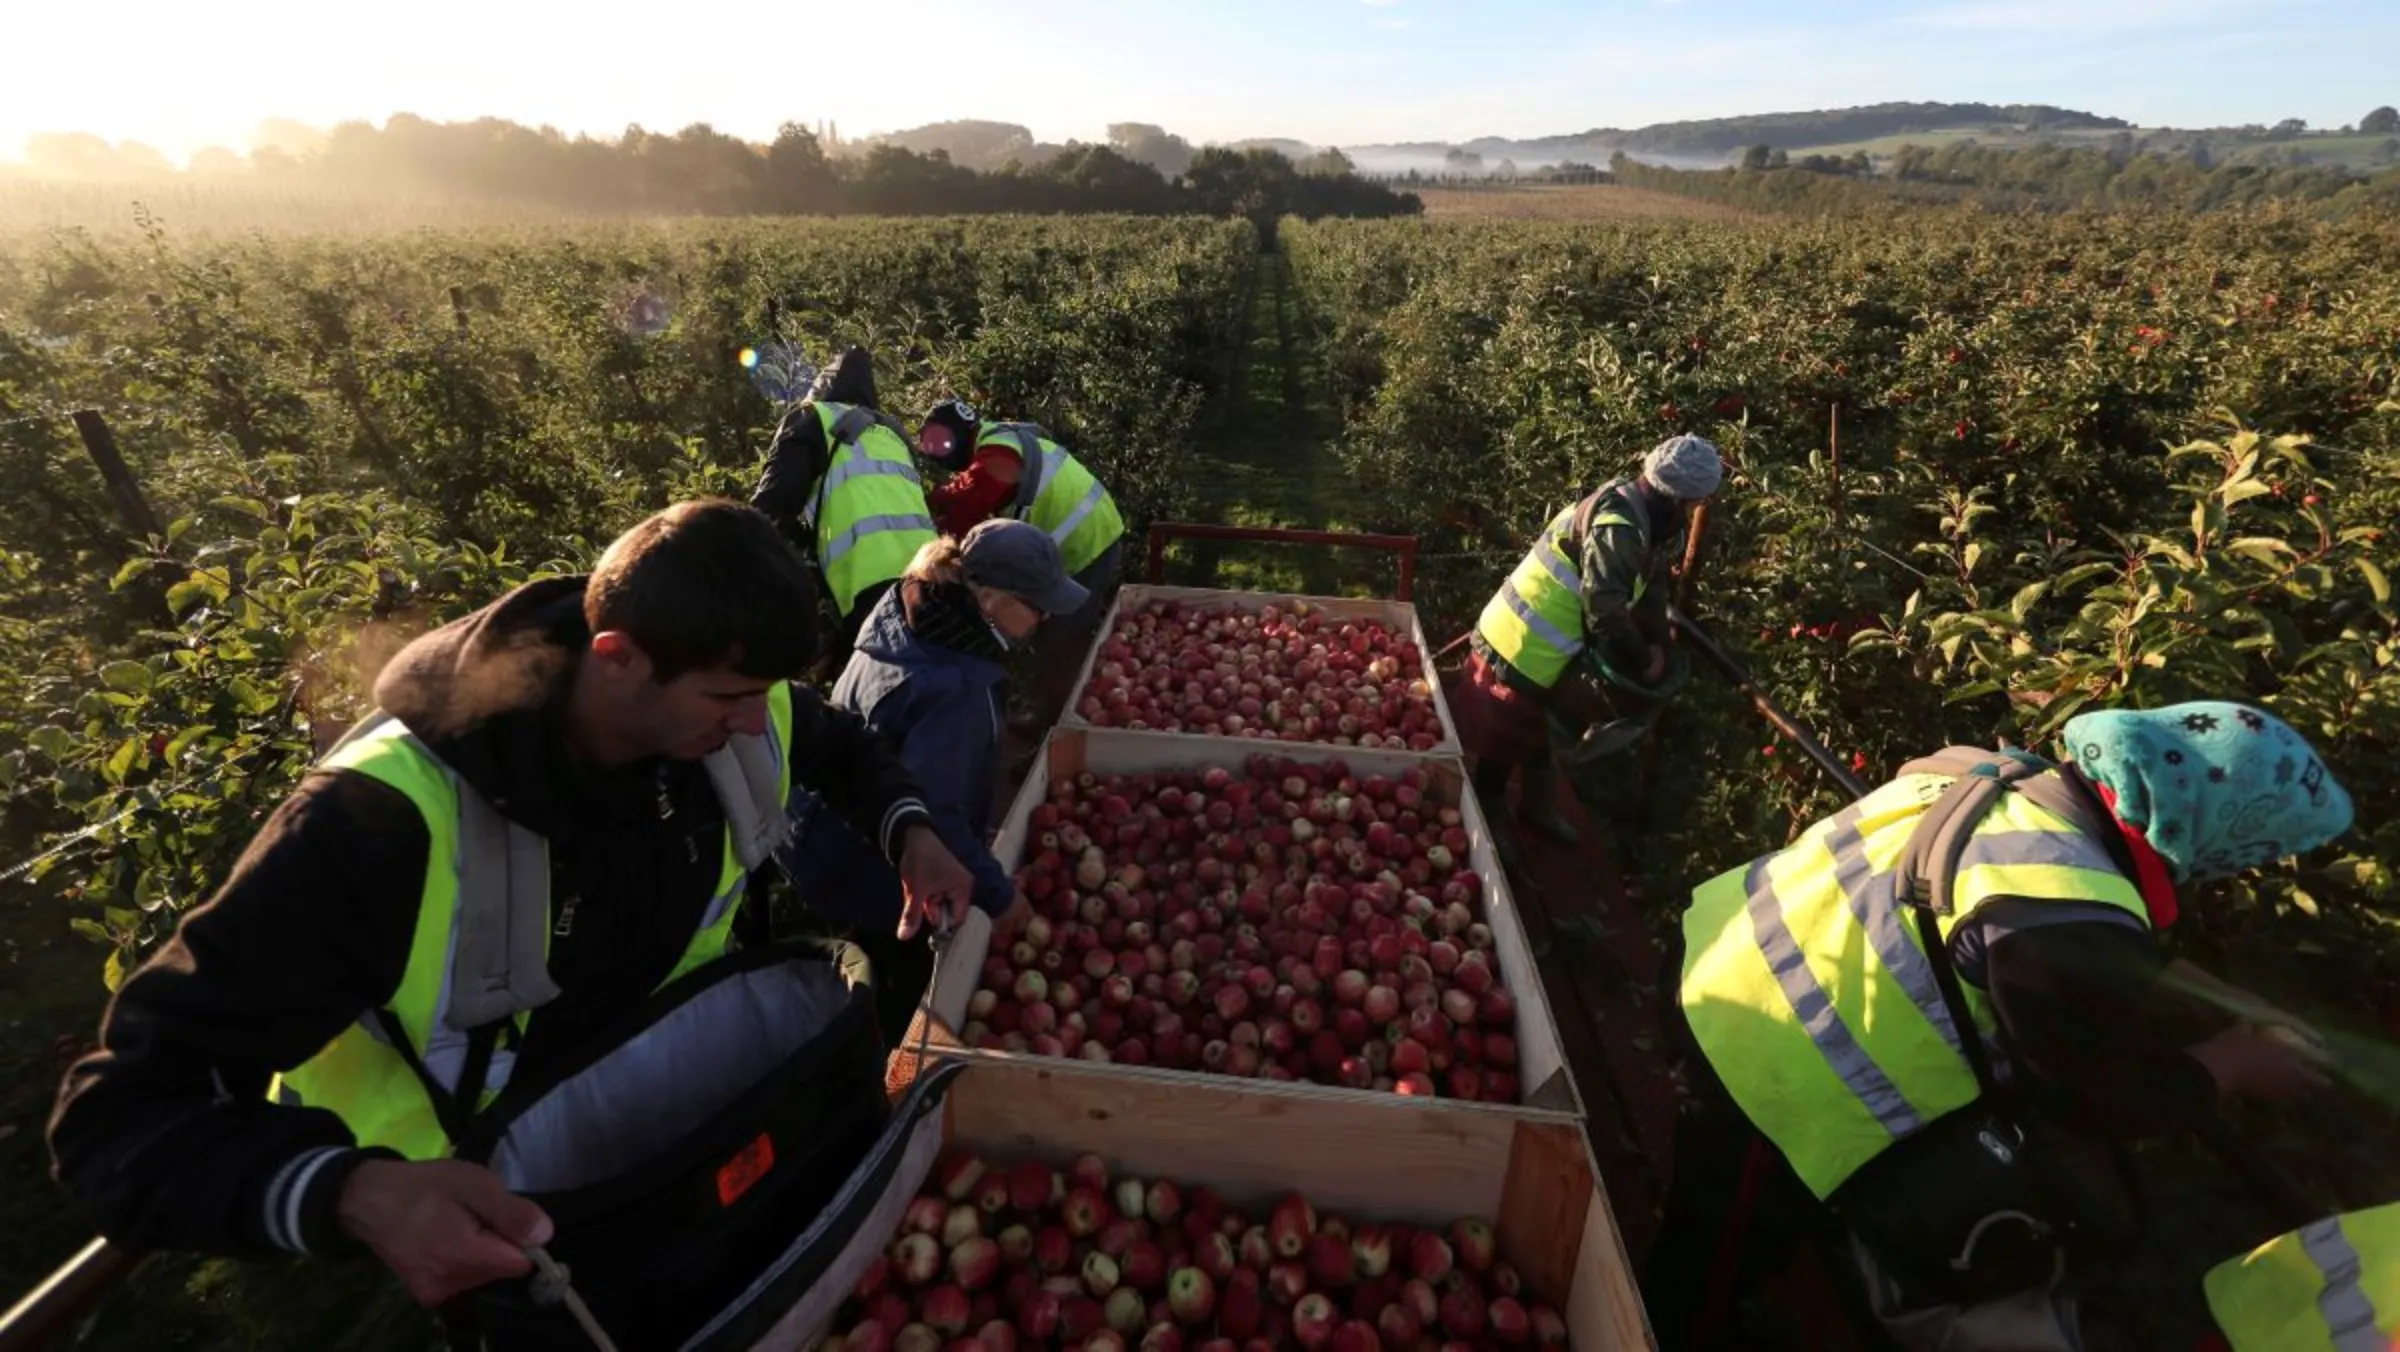 Migrant workers pick apples at a farm in Suckley, Britain October 10, 2016